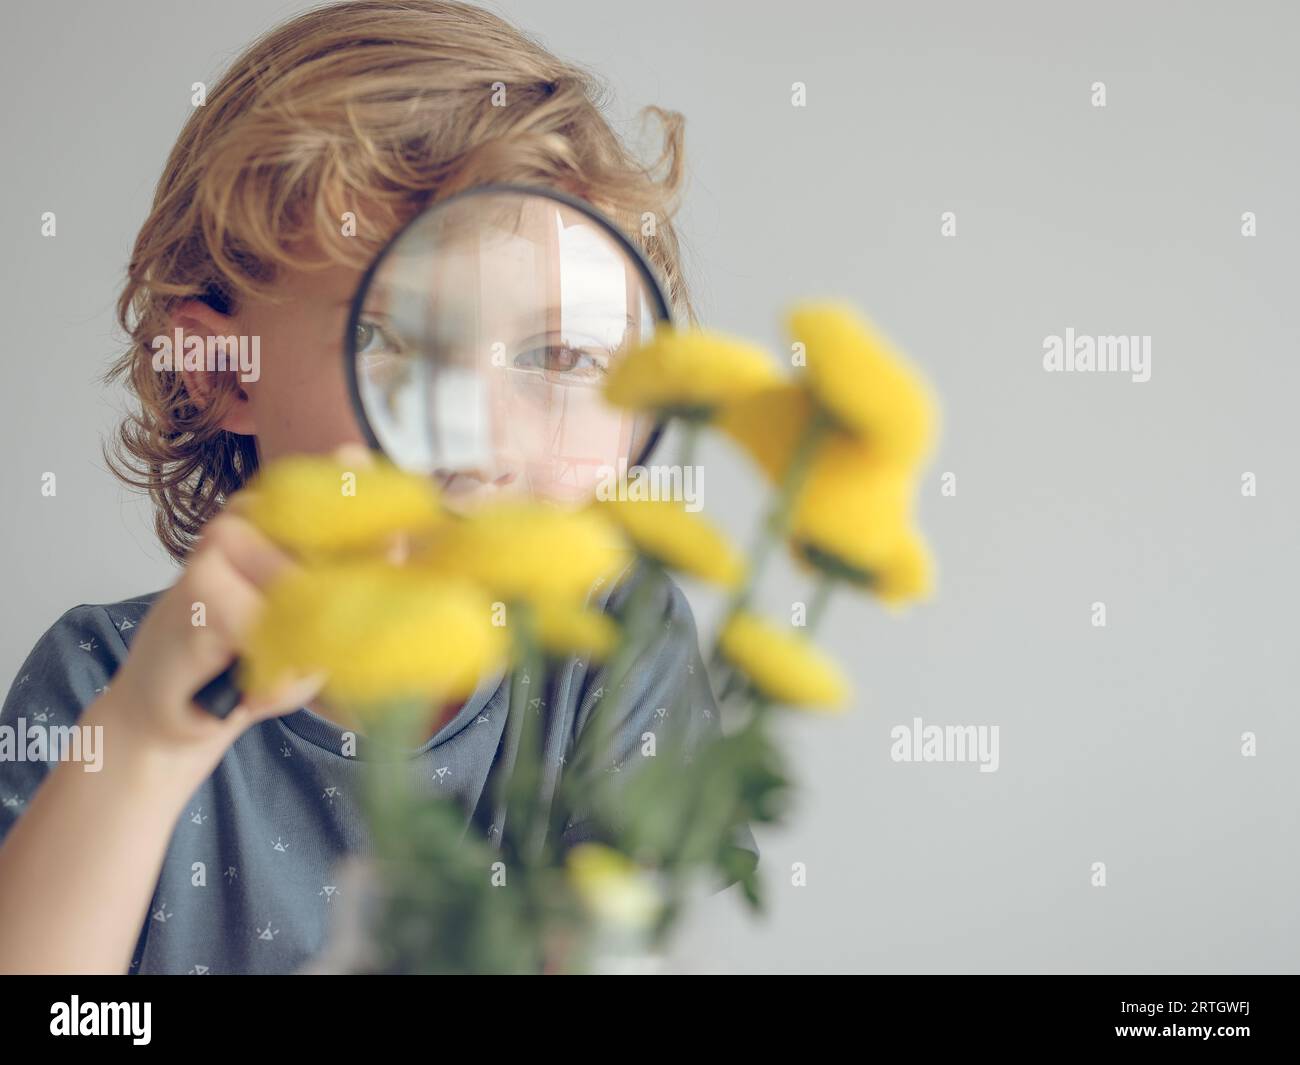 Blond haired kid holding magnifying glass near face while exploring yellow flowers against white wall Stock Photo